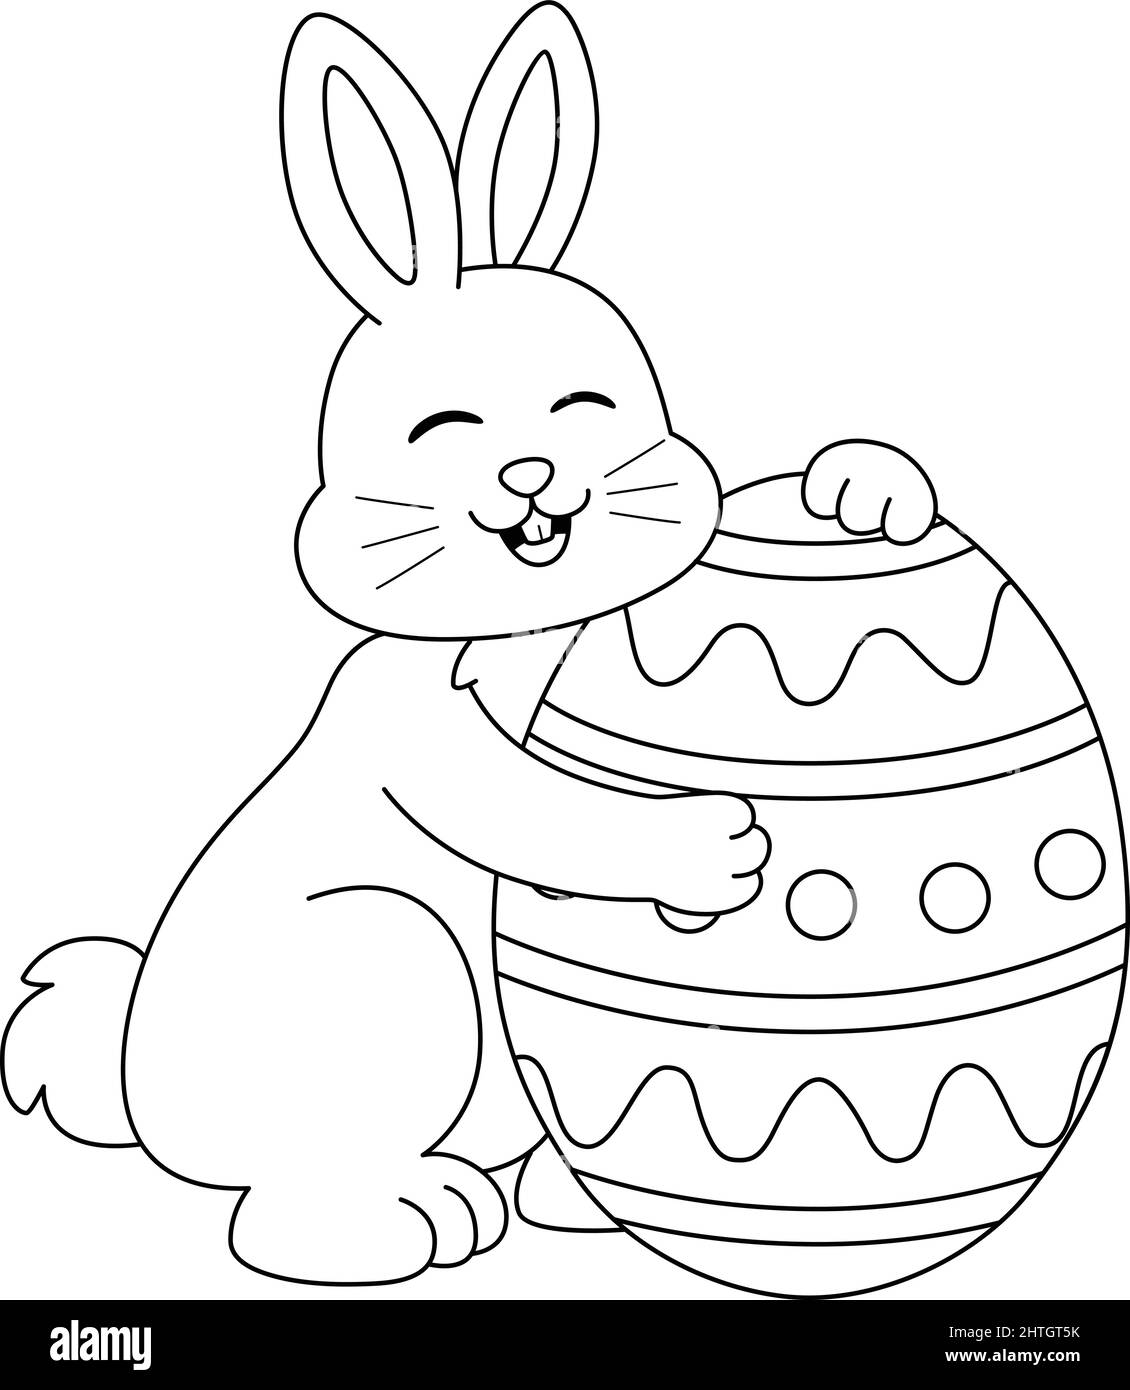 Rabbit Hugging Easter Egg Coloring Page for Kids Stock Vector ...